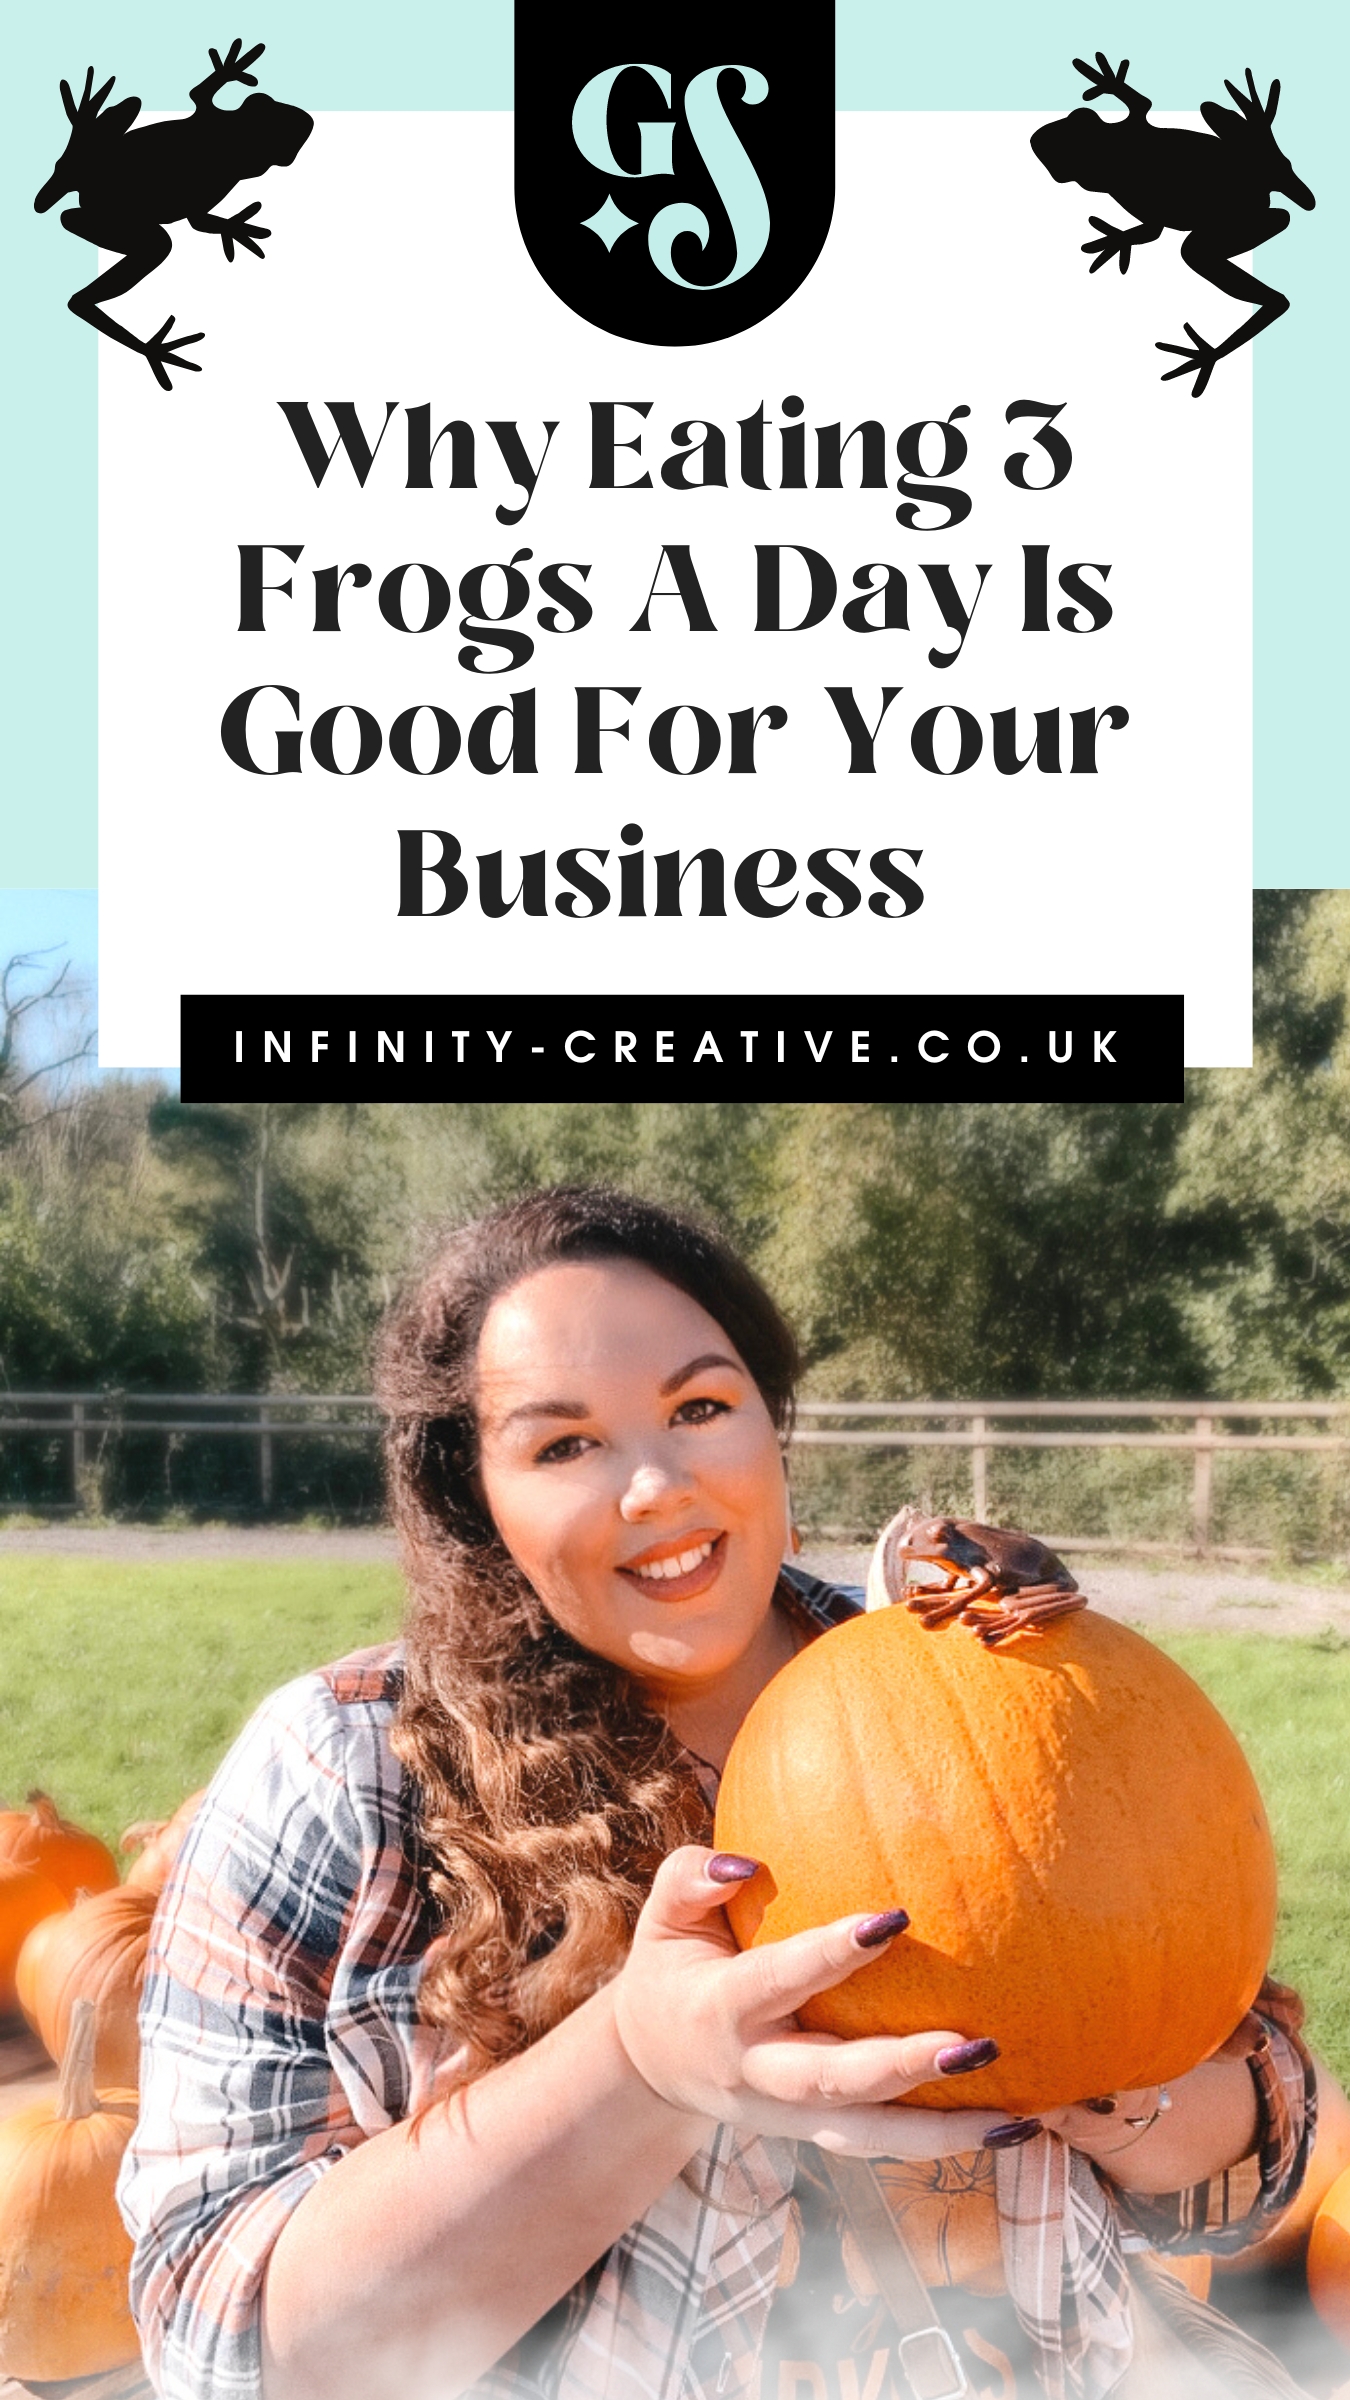 Why Eating 3 Frogs a Day is Good For Your Business